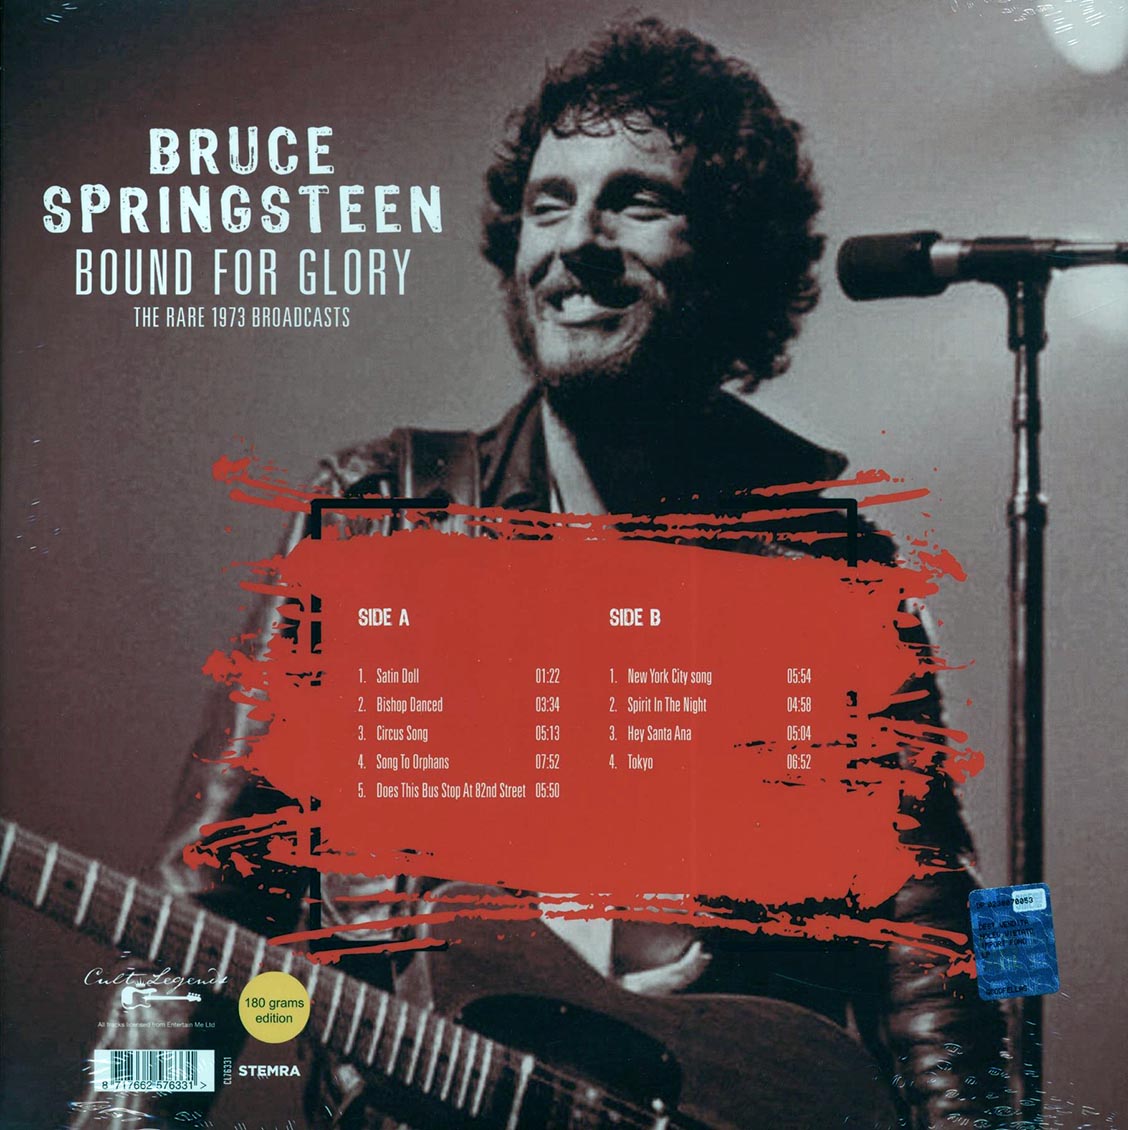 Bruce Springsteen - Bound For Glory: The Rare 1973 Broadcasts - Vinyl LP, LP